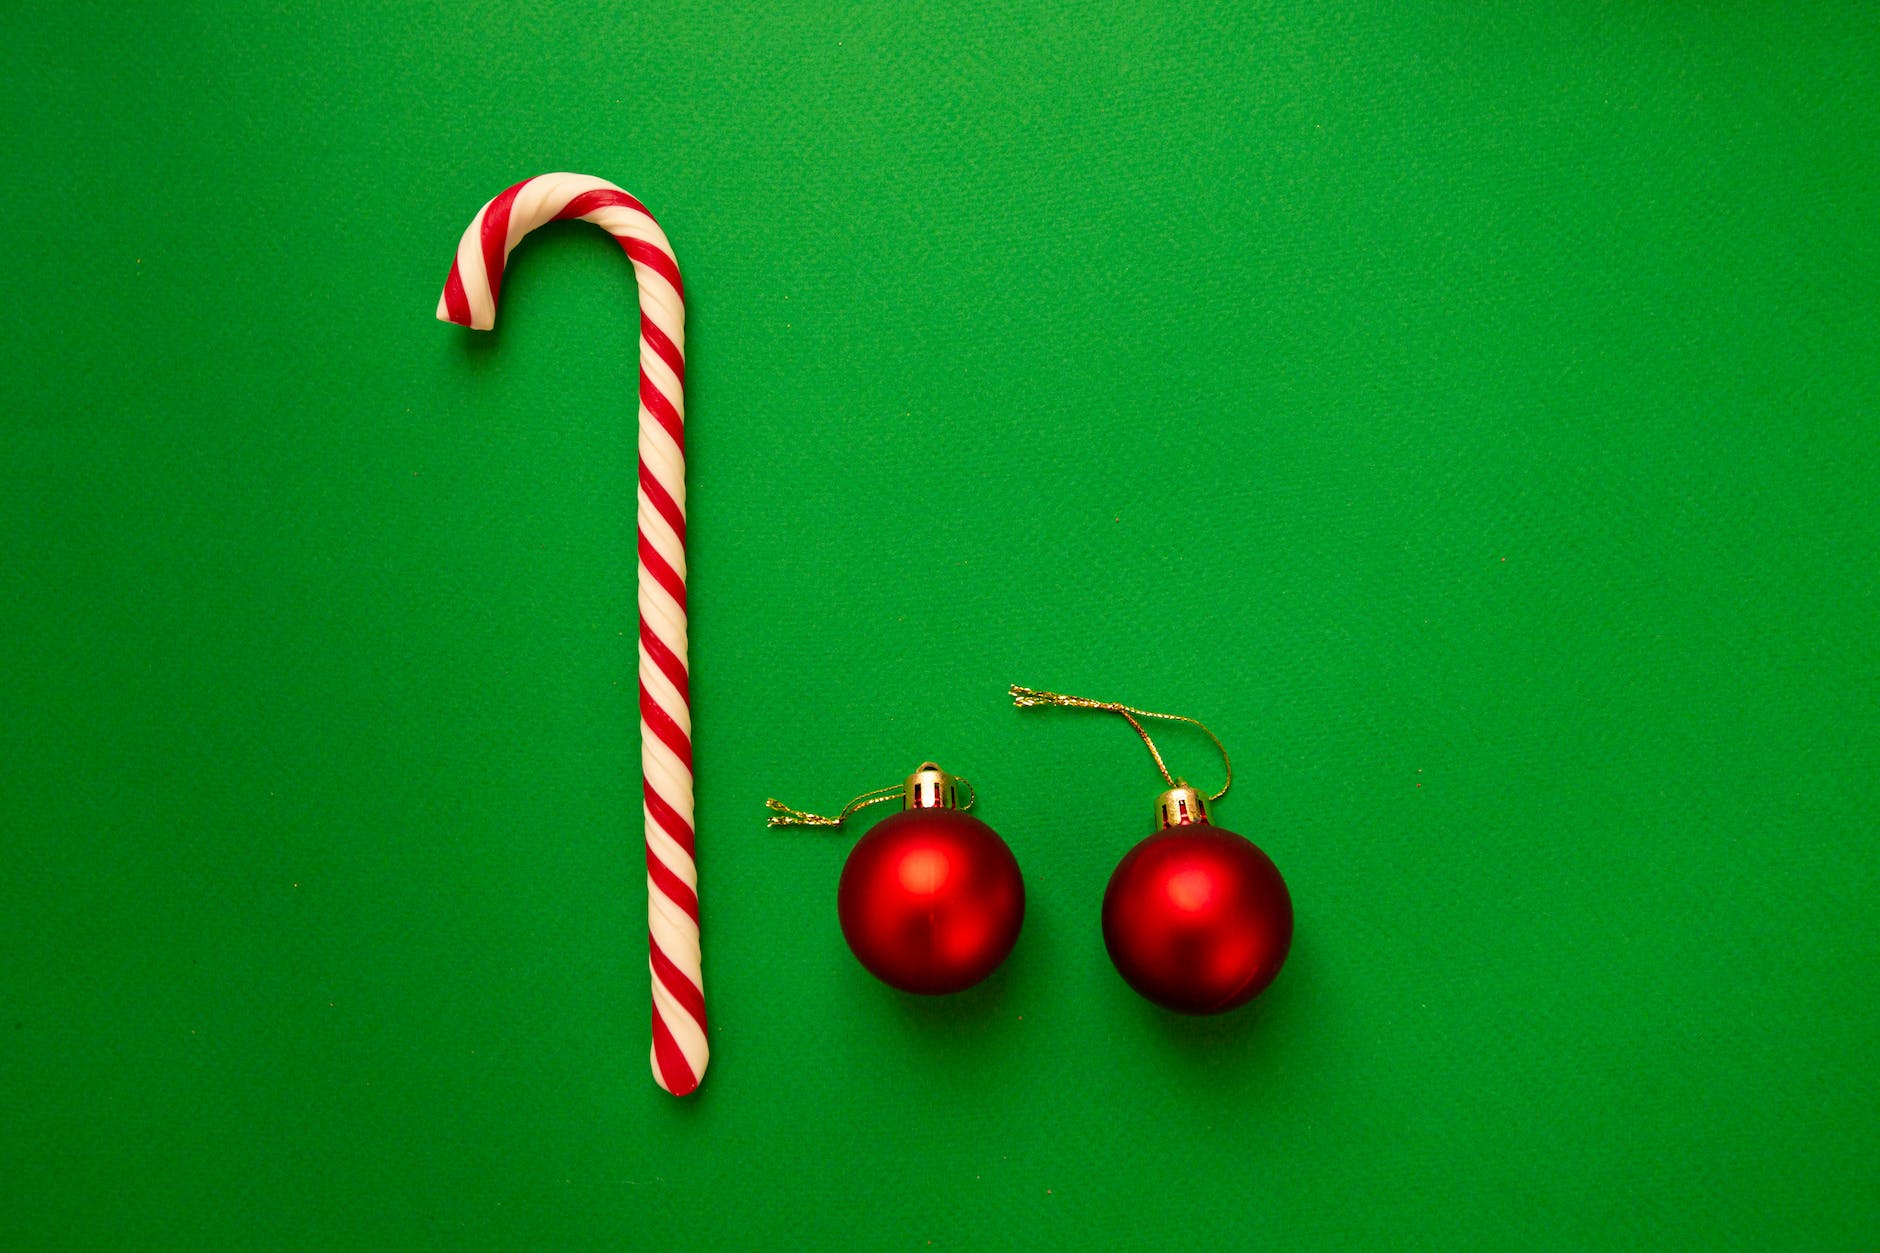 Photo by Victoria Emerson on <a href="https://www.pexels.com/photo/striped-christmas-candy-cane-and-red-baubles-placed-on-green-table-6037904/" rel="nofollow">Pexels.com</a>